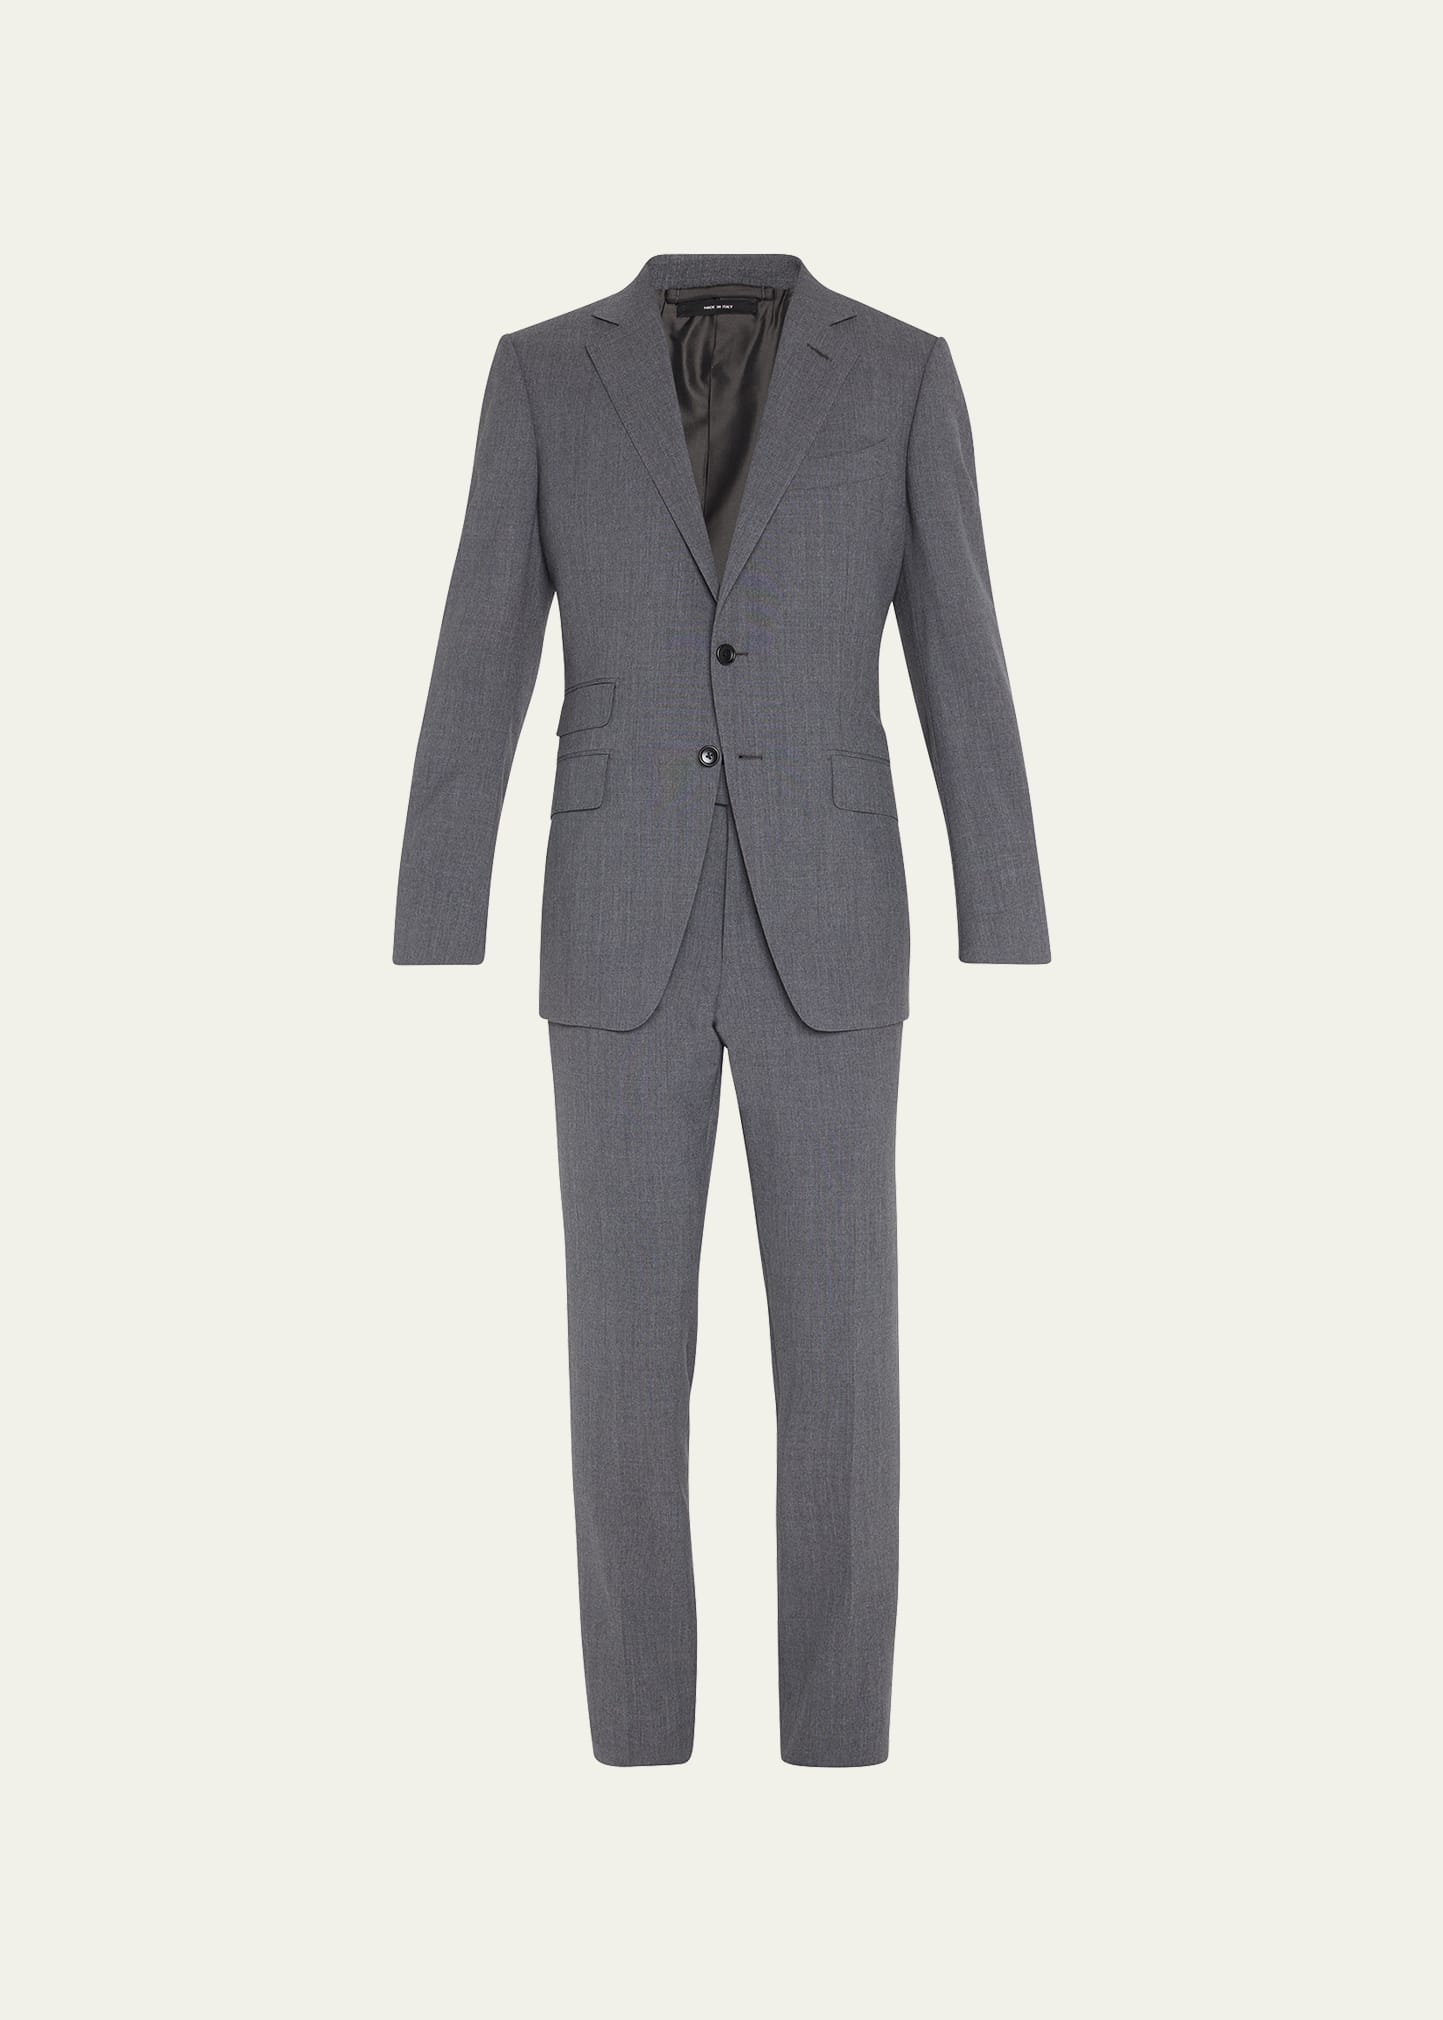 TOM FORD Men's Prince of Wales Wool Suit | Smart Closet